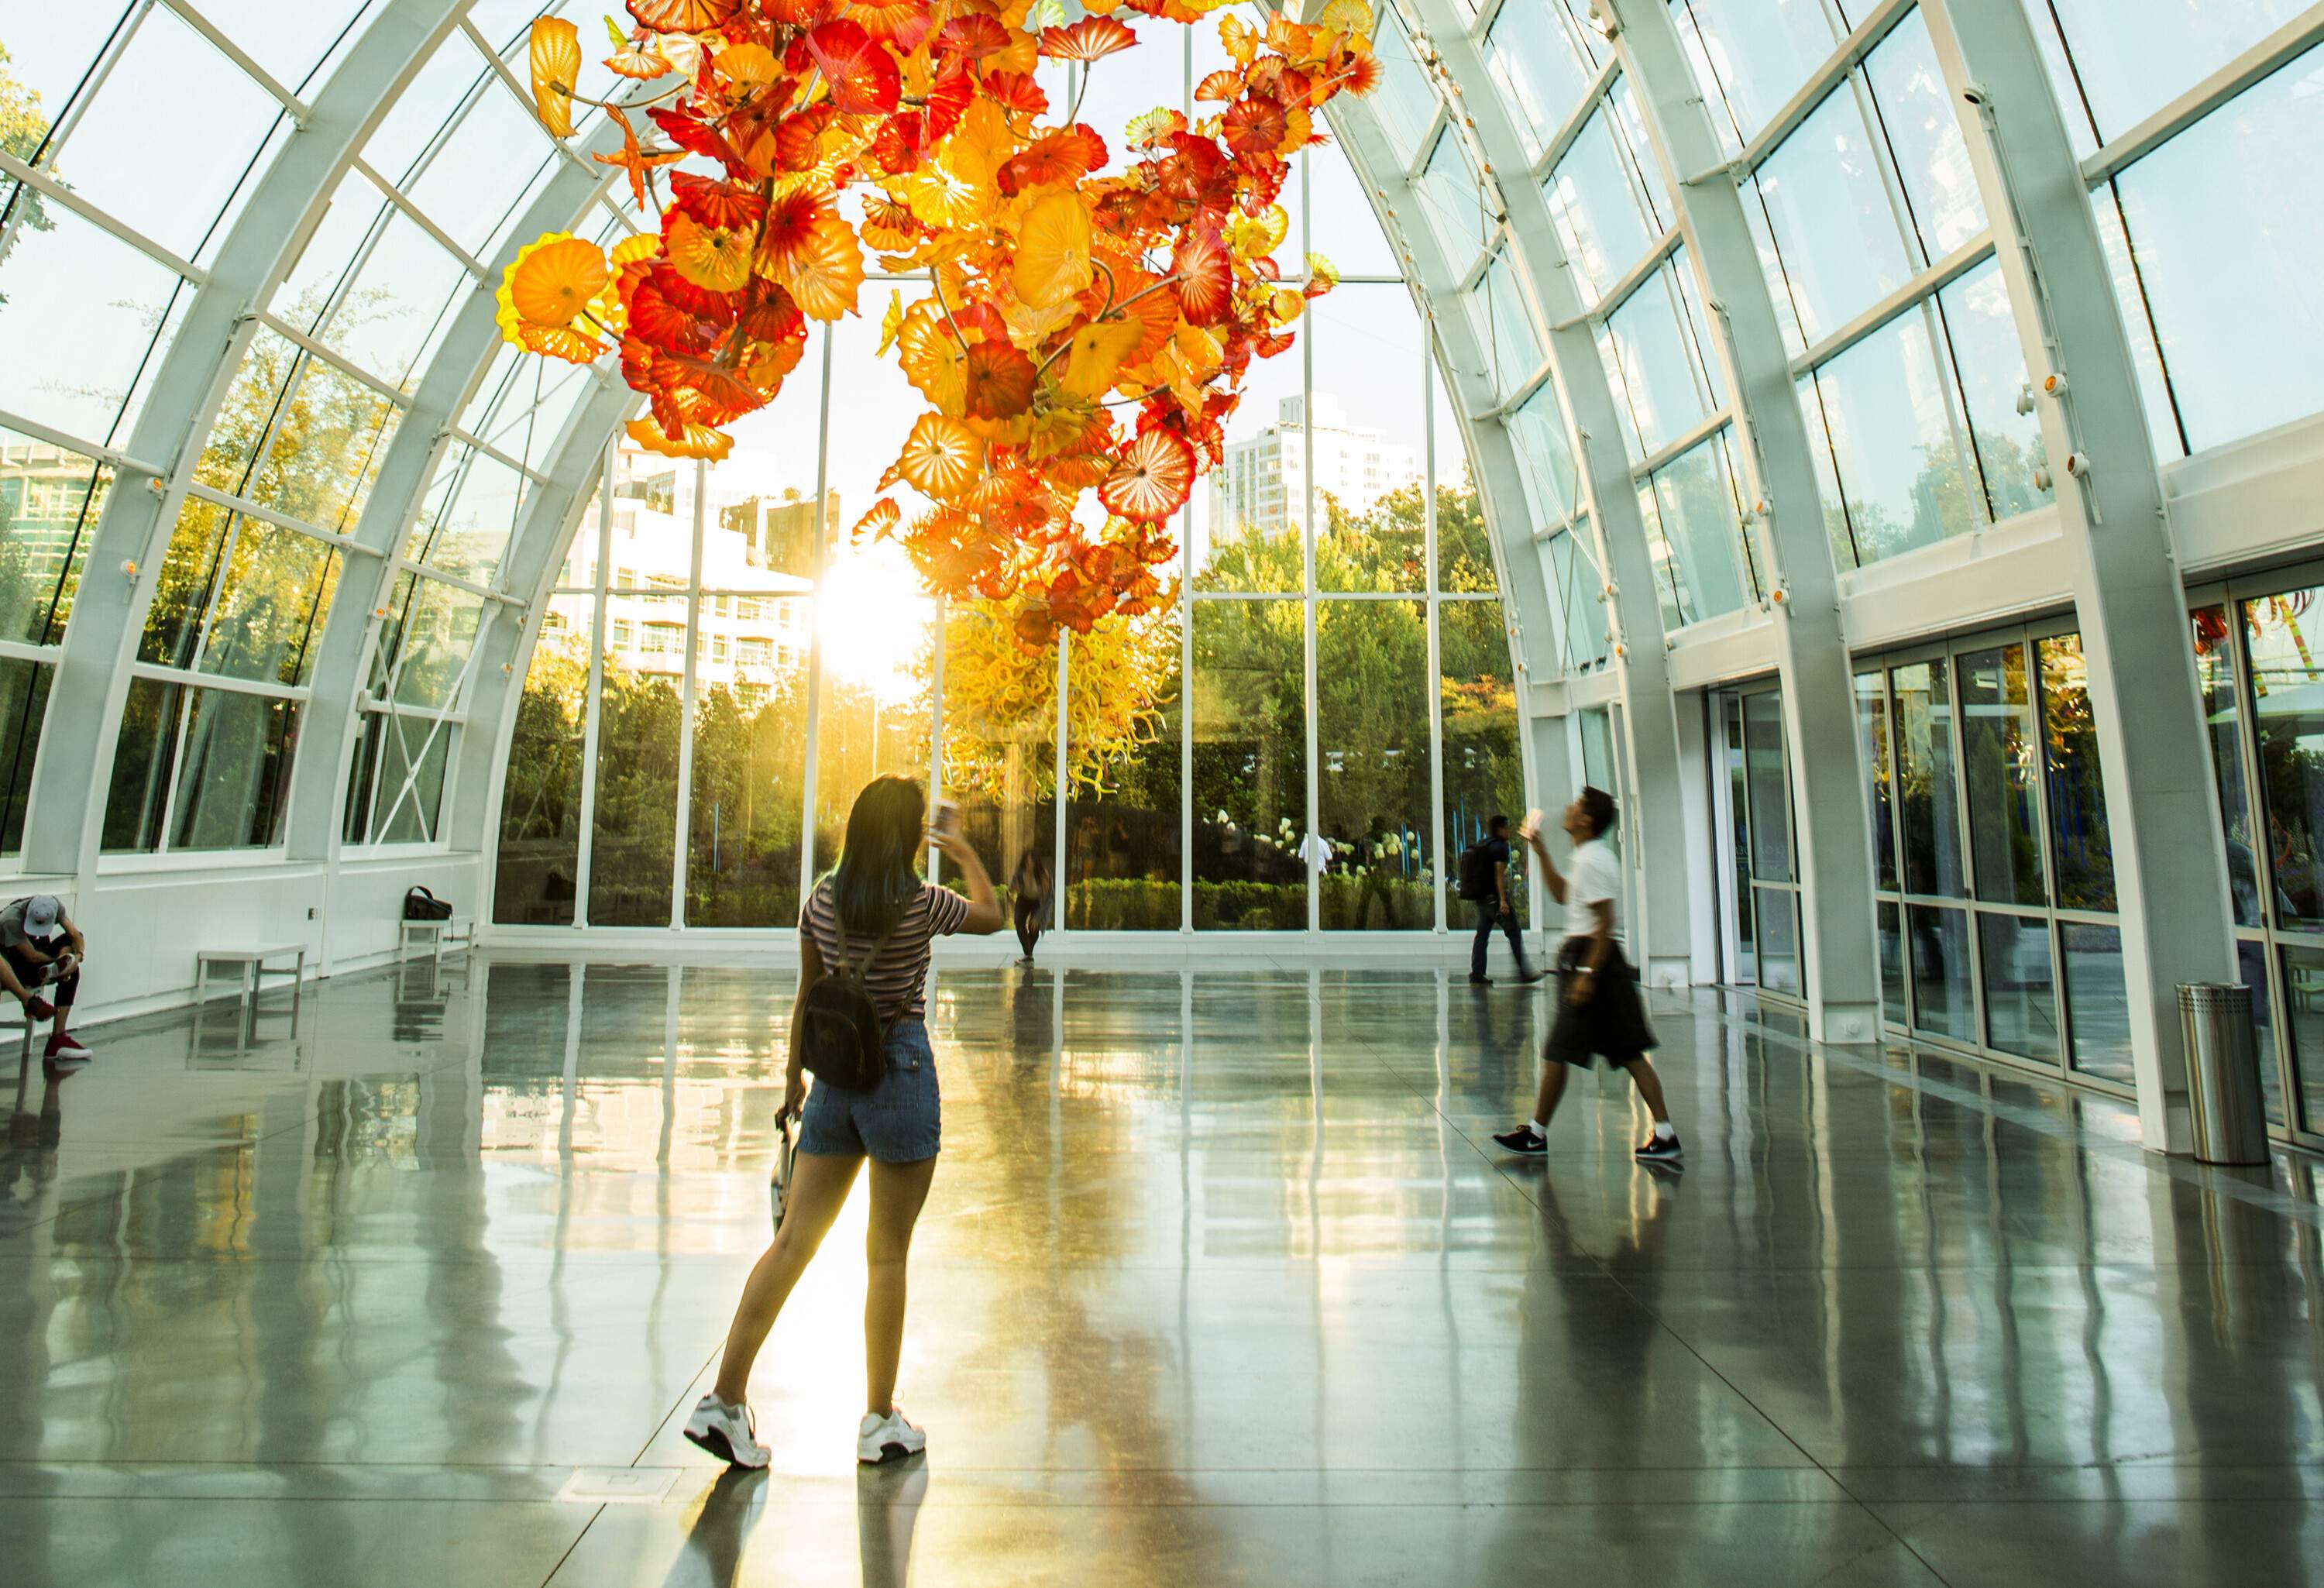 dest_usa_washington_seattle_seattle-center_theme_chihuly-garden-and-glass-exhibit-gettyimages-685006615_universal_within-usage-period_32826